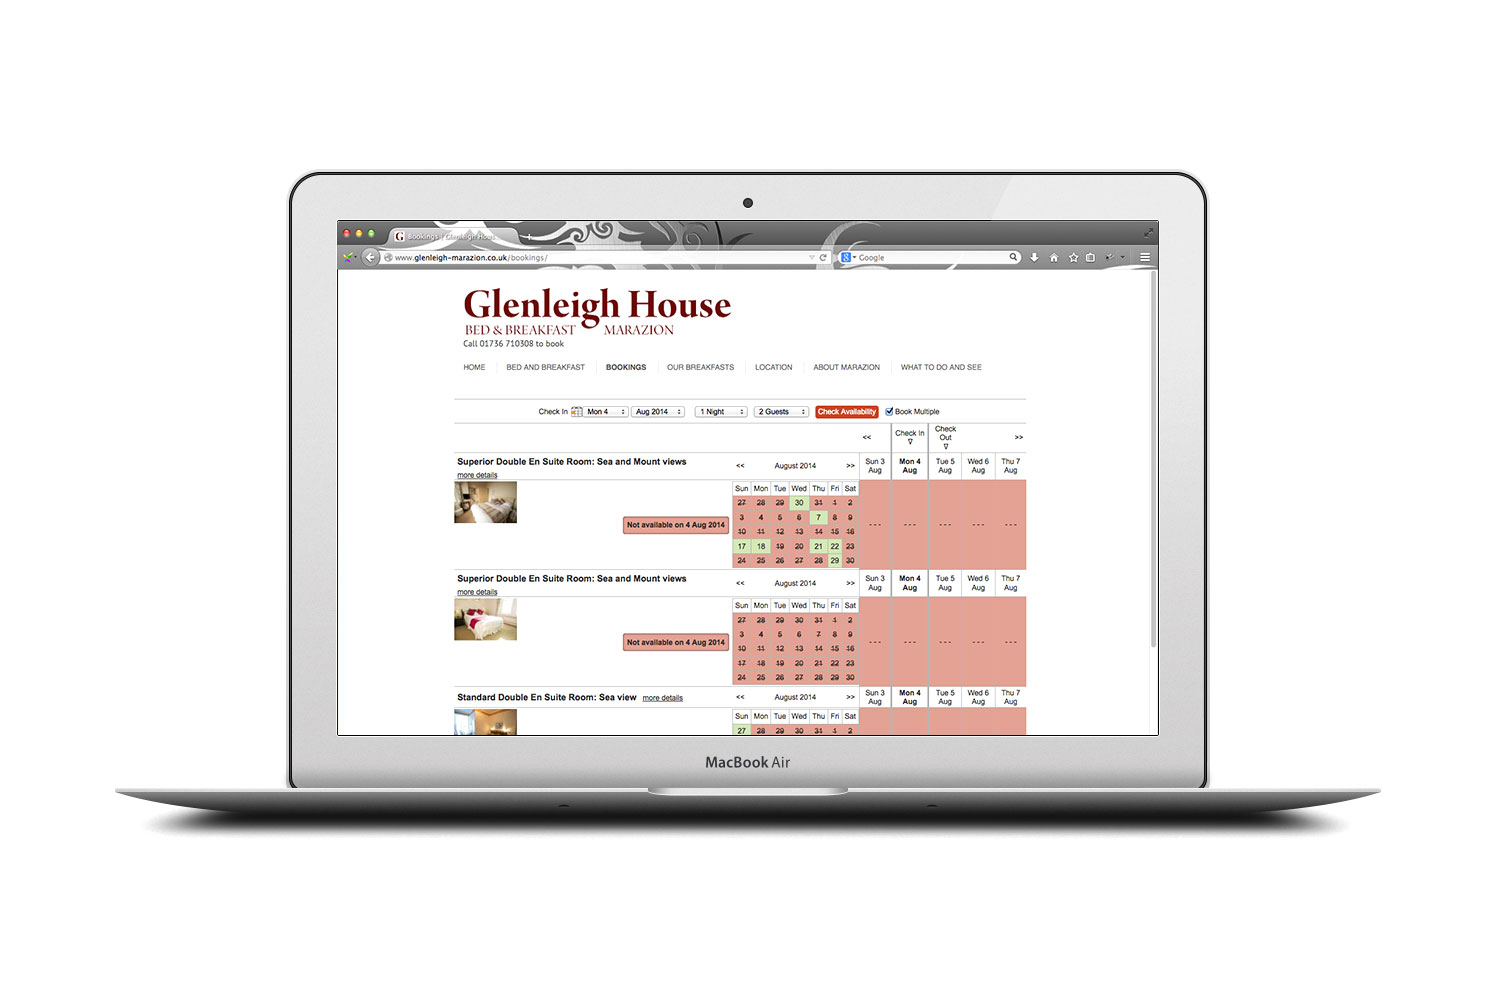 Glenleigh House yourBookings online booking system from cornishrock in Cornwall, professional website designers